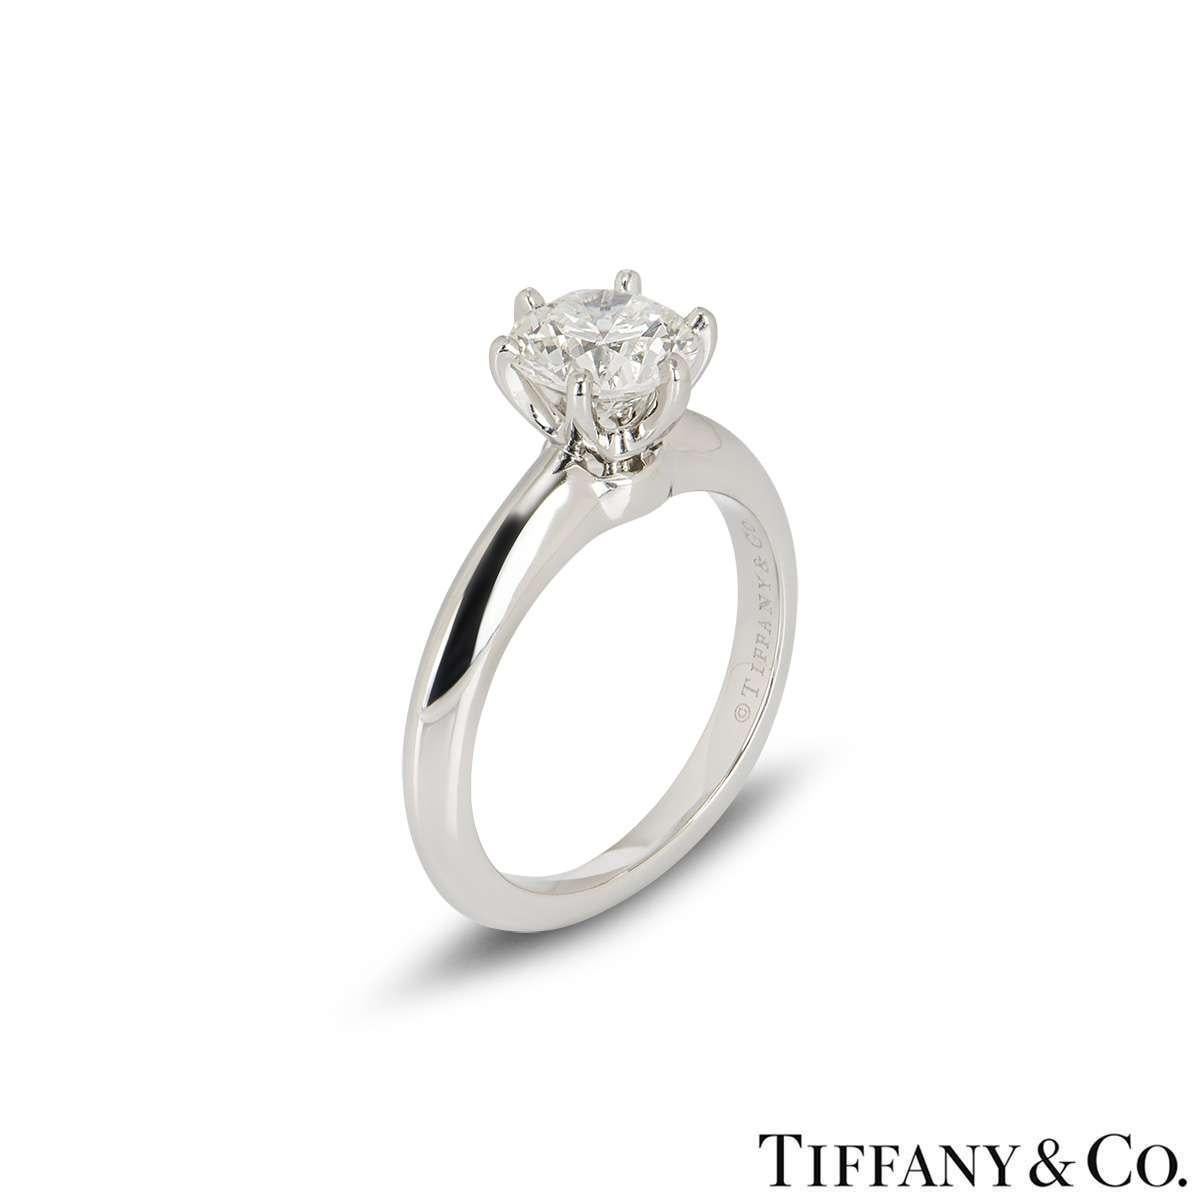 A beautiful platinum diamond ring by Tiffany & Co. from The Setting collection. The ring comprises of a round brilliant cut diamond in a 6 claw setting with a weight of 1.01ct, I colour and VS2 clarity. The diamond scores an excellent rating in all